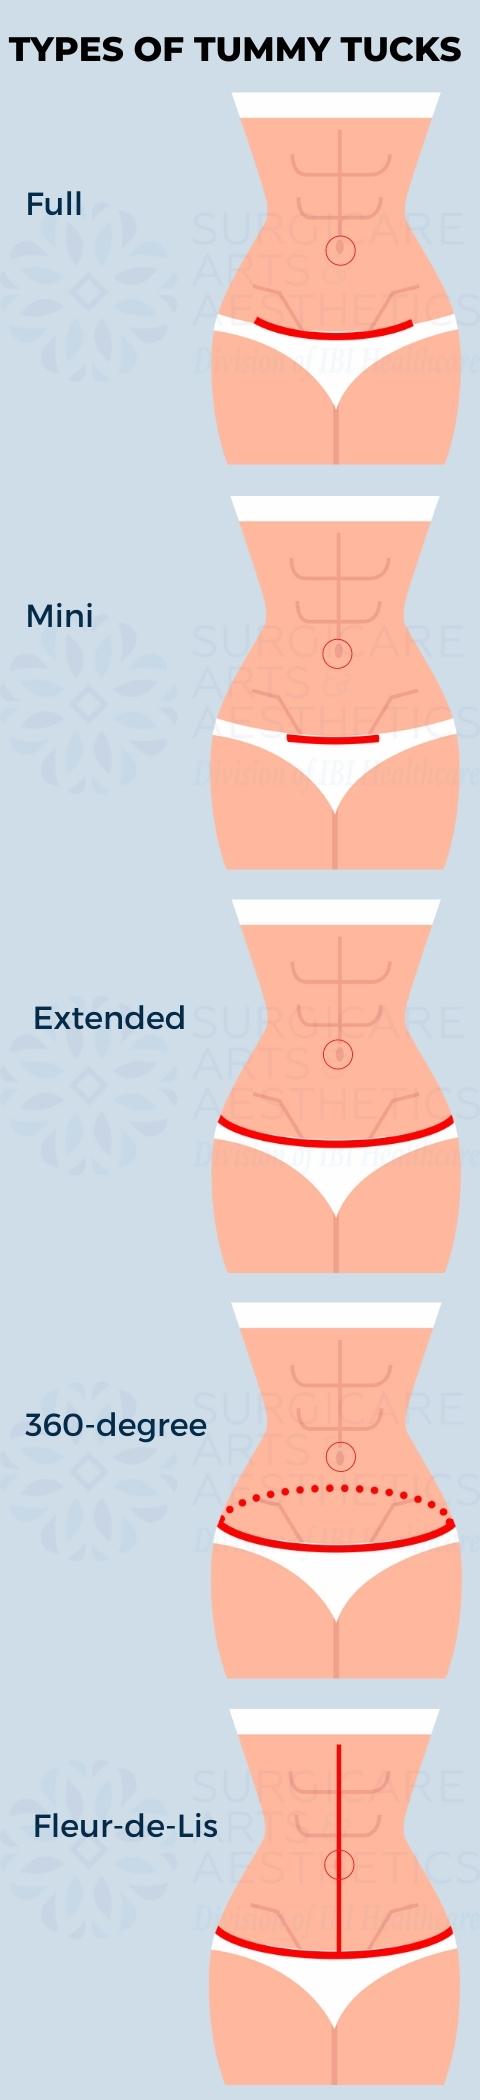 https://www.surgicarearts.com/wp-content/uploads/types-of-tummy-tuck-mobile-version-2.jpg